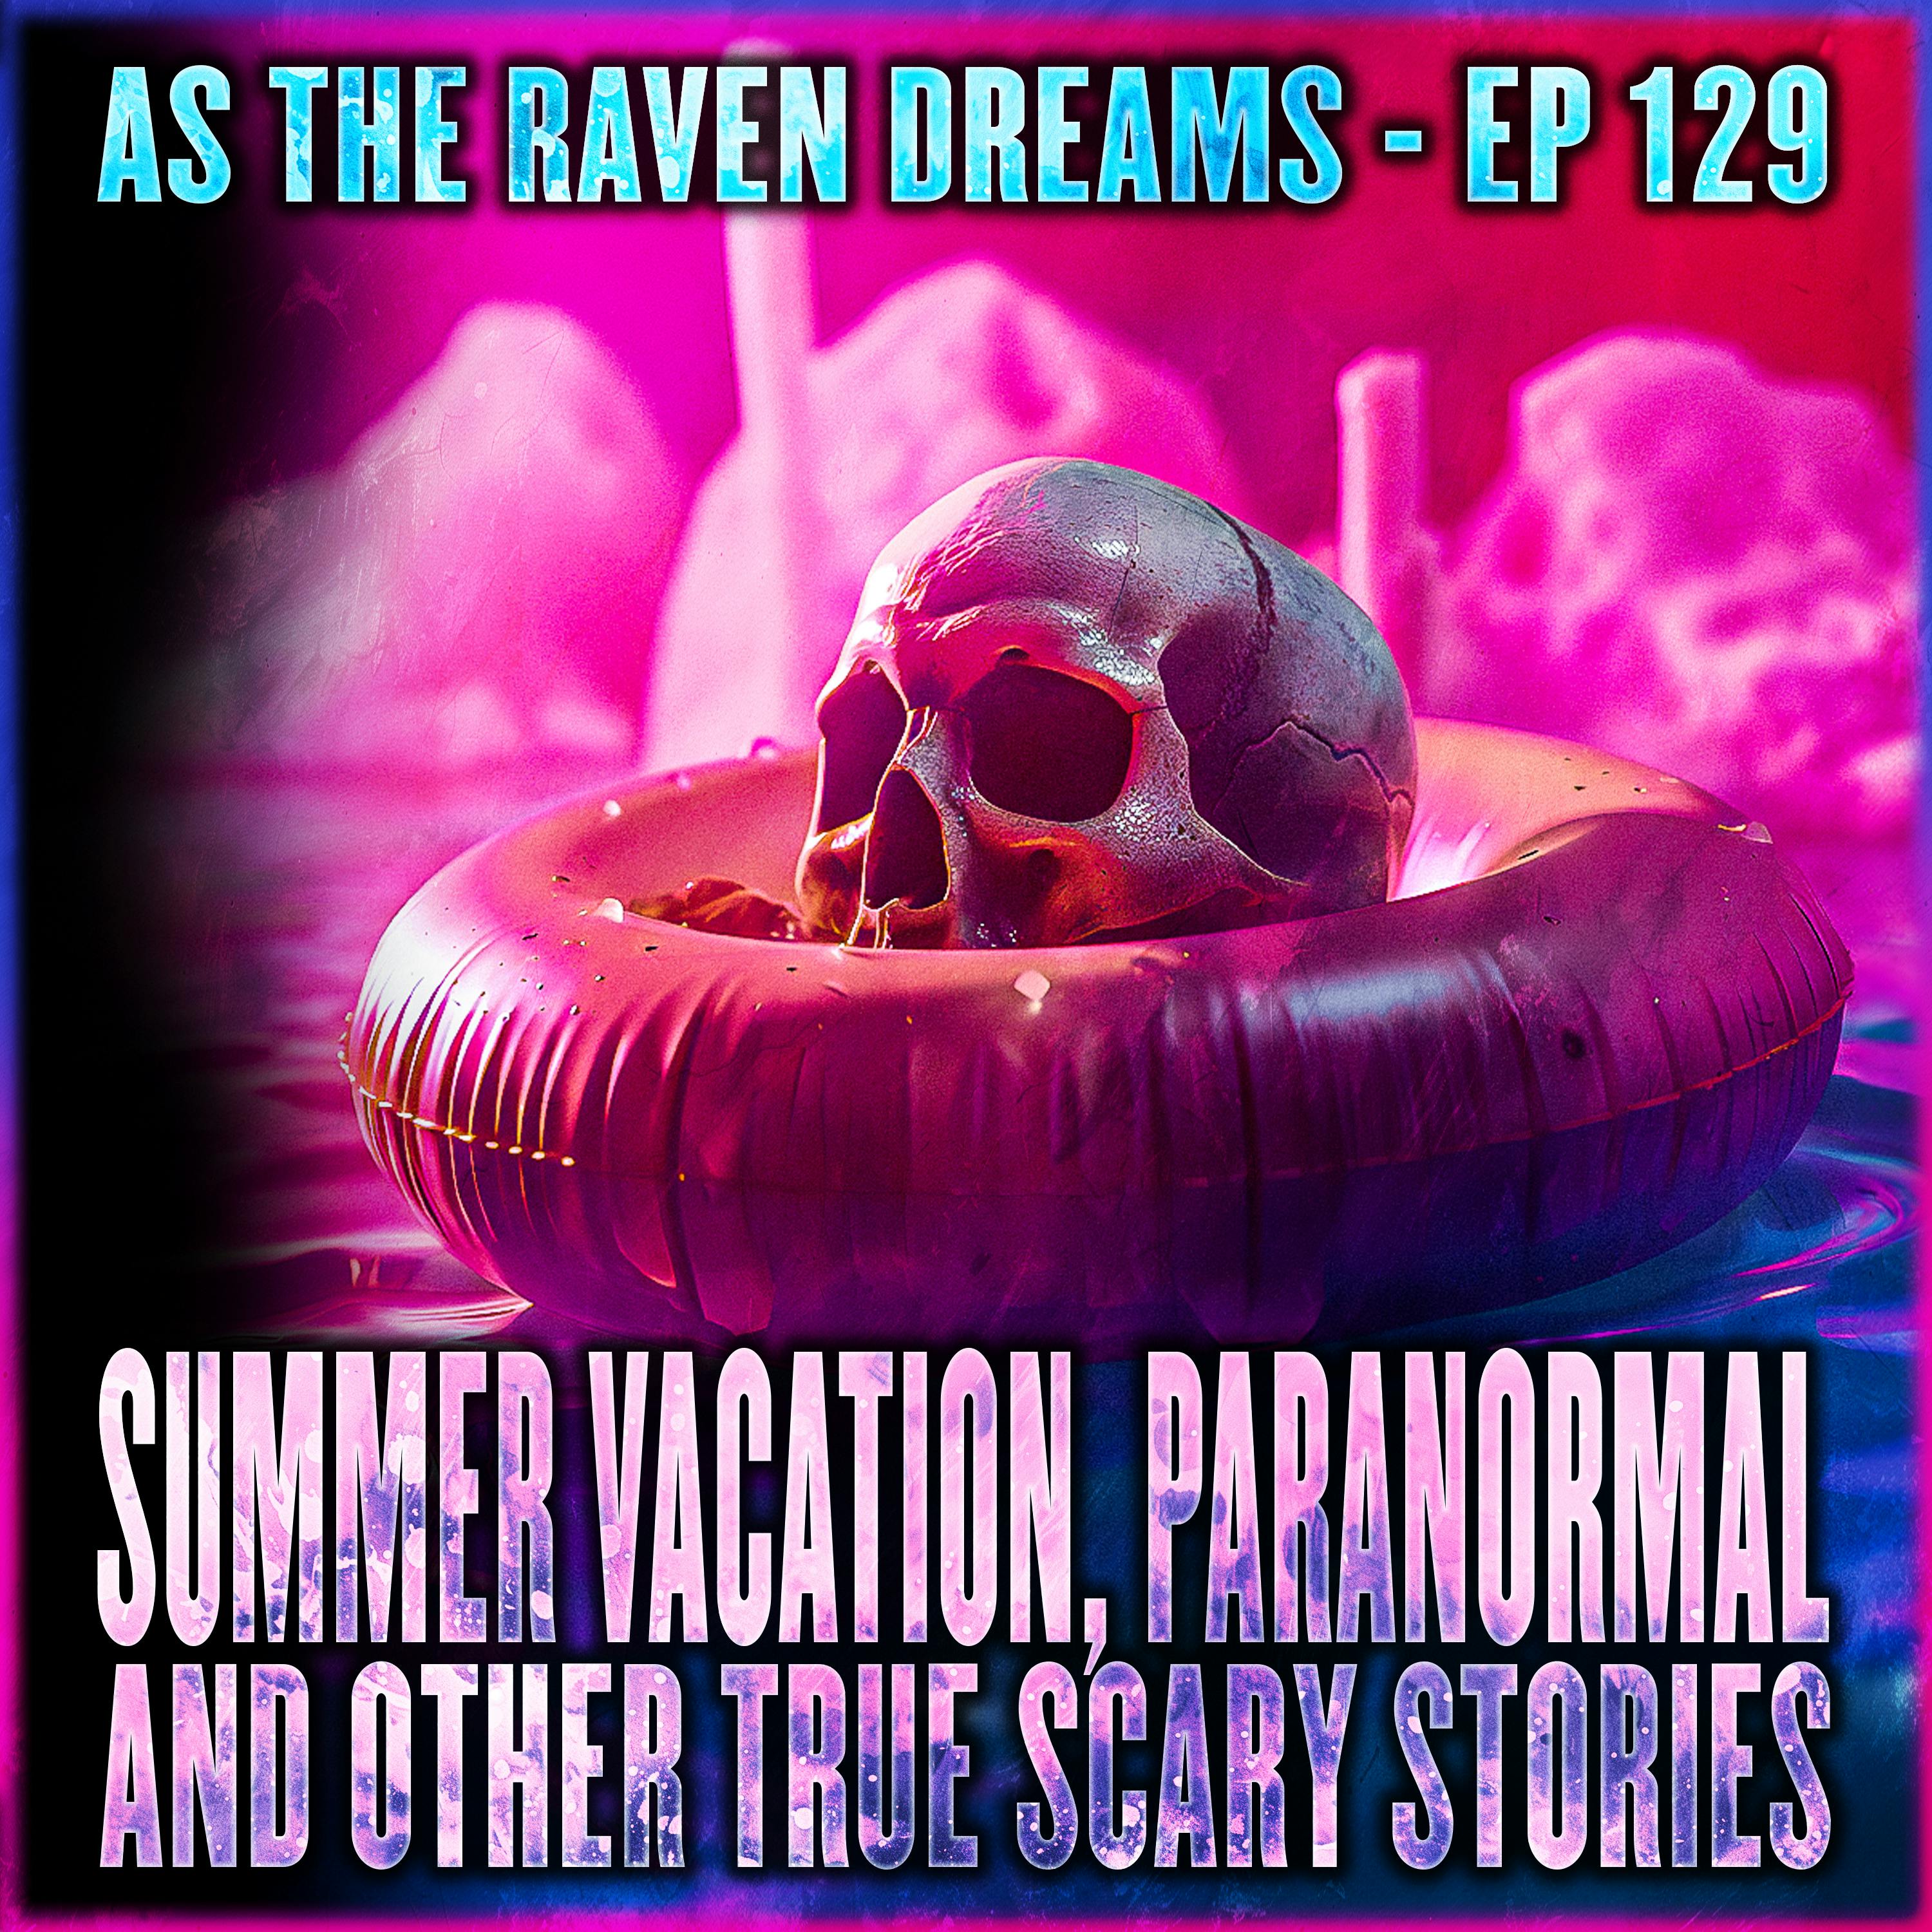 ATRD Ep. 129 - Scary Summer Vacation, Paranormal, and Other True Scary Stories - 22 True Scary Stories